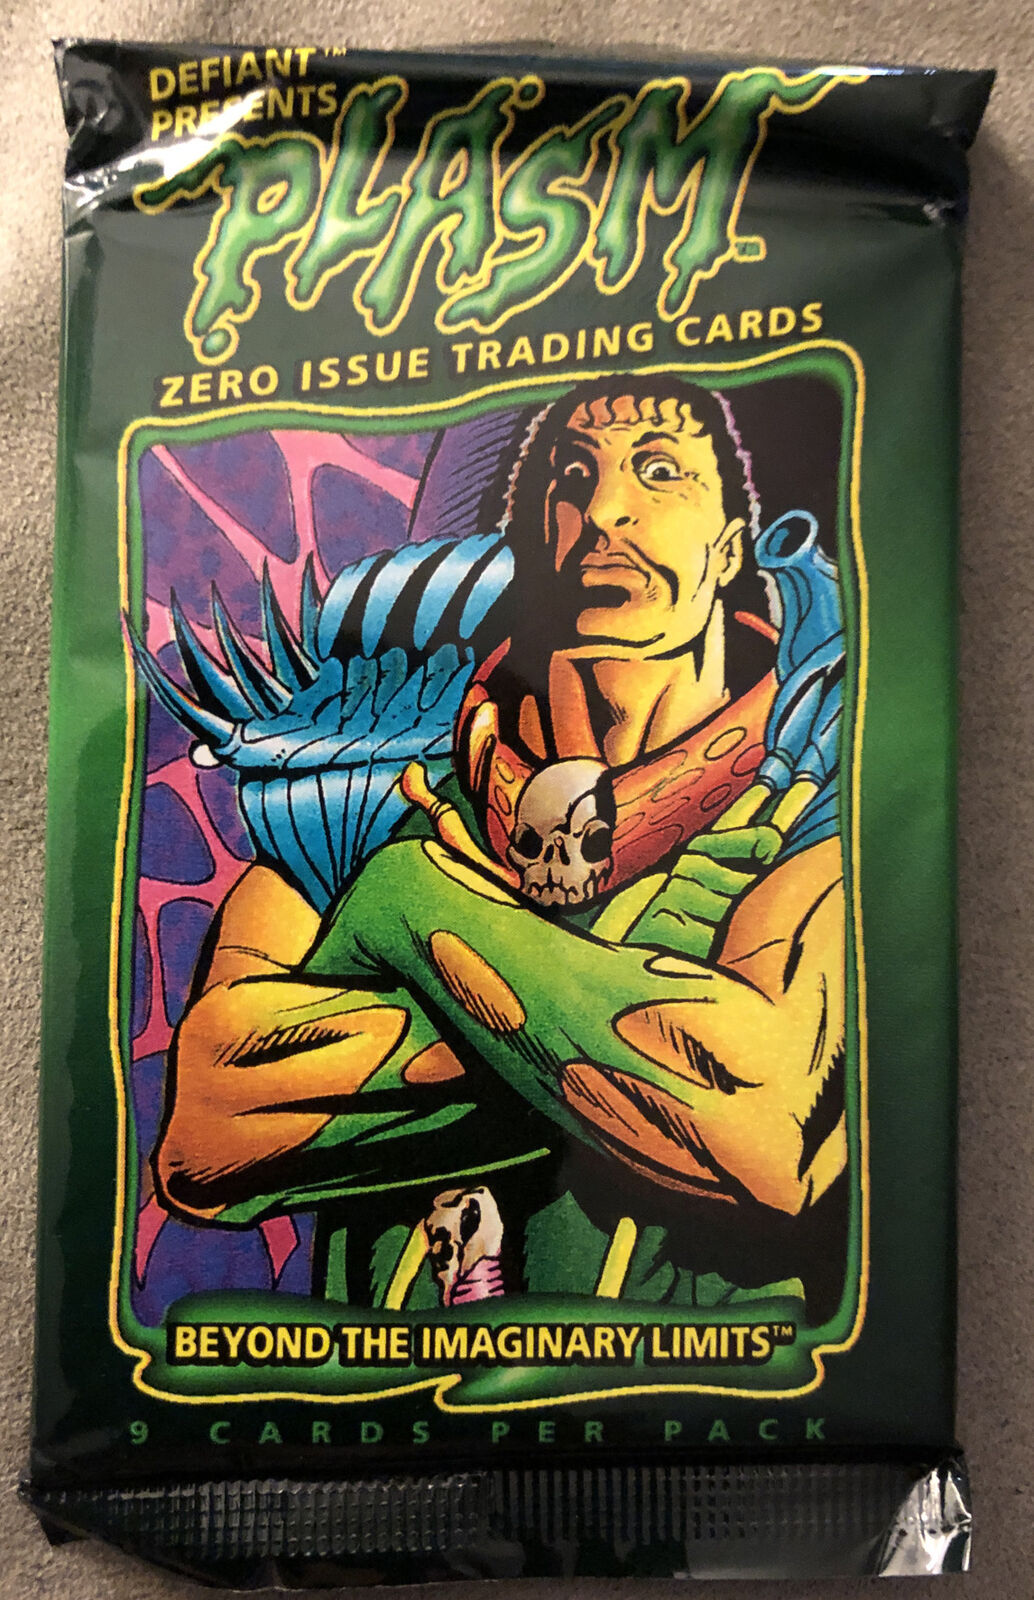 1993 River Group Plasm Zero Issue Trading Cards Unopened Pack